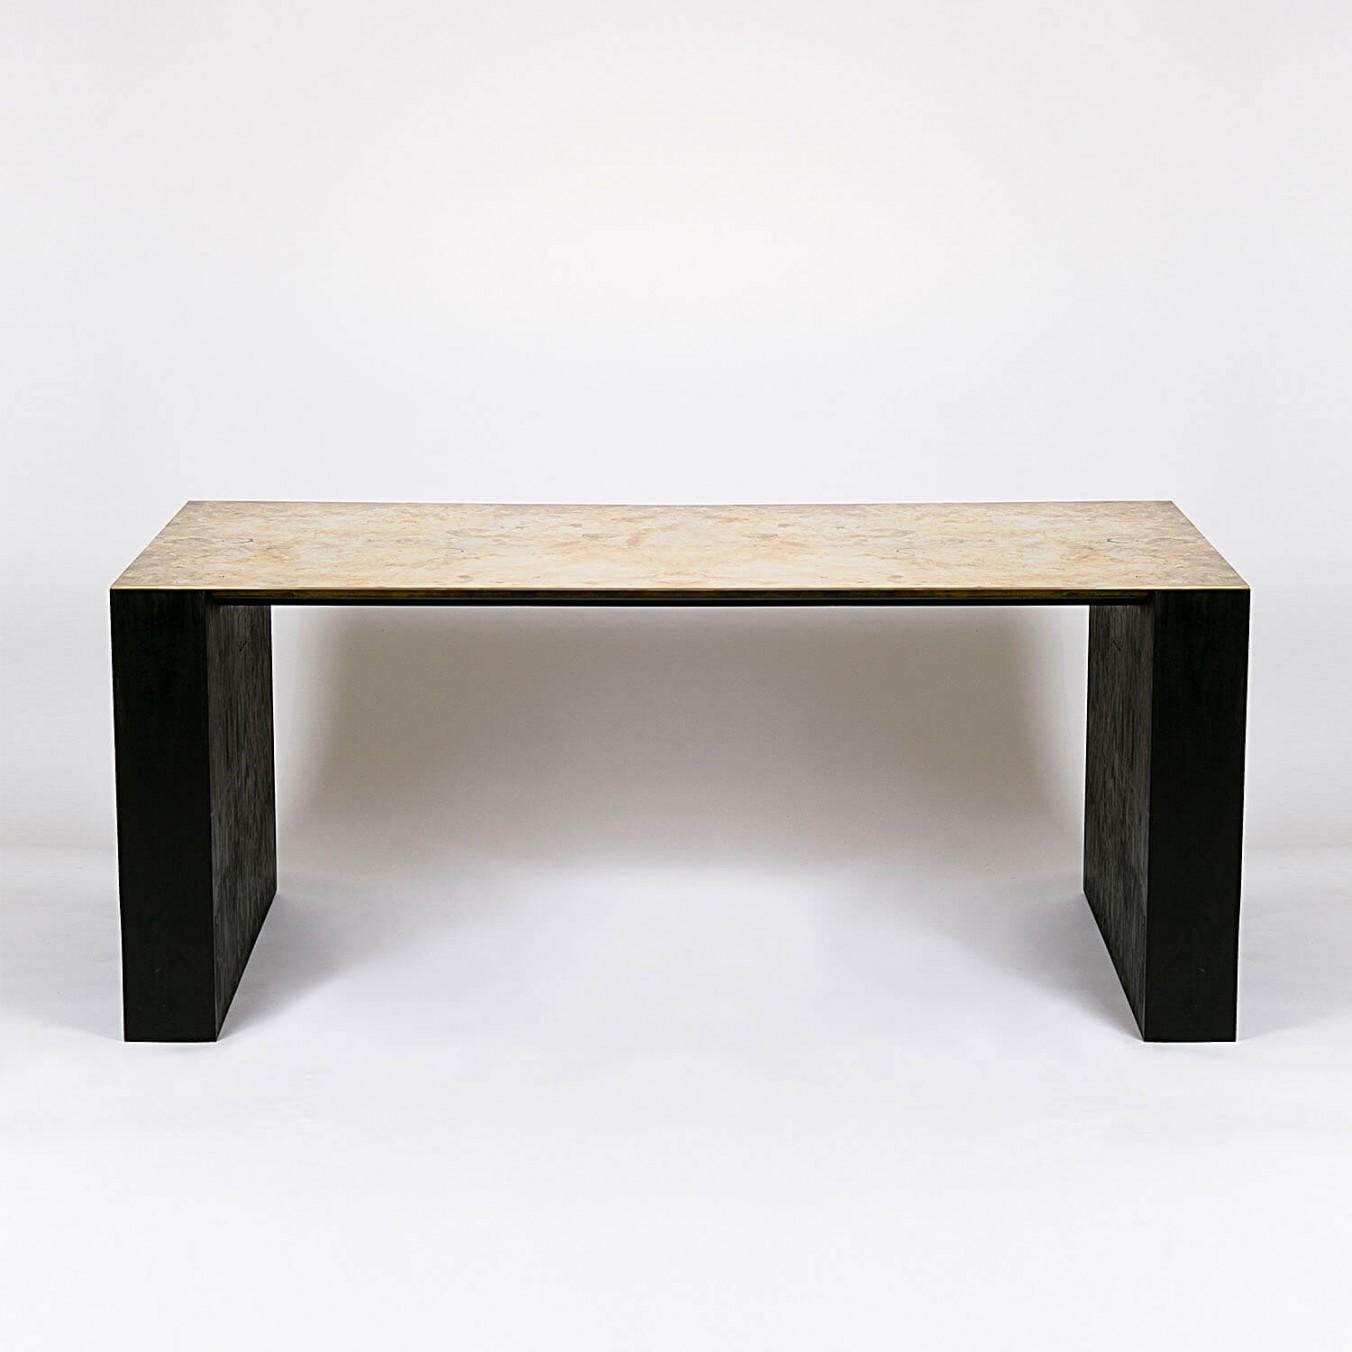 Contemporary brass and plywood table - showroom table by Rick Owens
2007
Dimensions: L 183 x W 83 x H 75 cm
Materials: brass, plywood
Weight: 77 kg

Rick Owens is a California-born fashion and furniture has developed a unique style that he